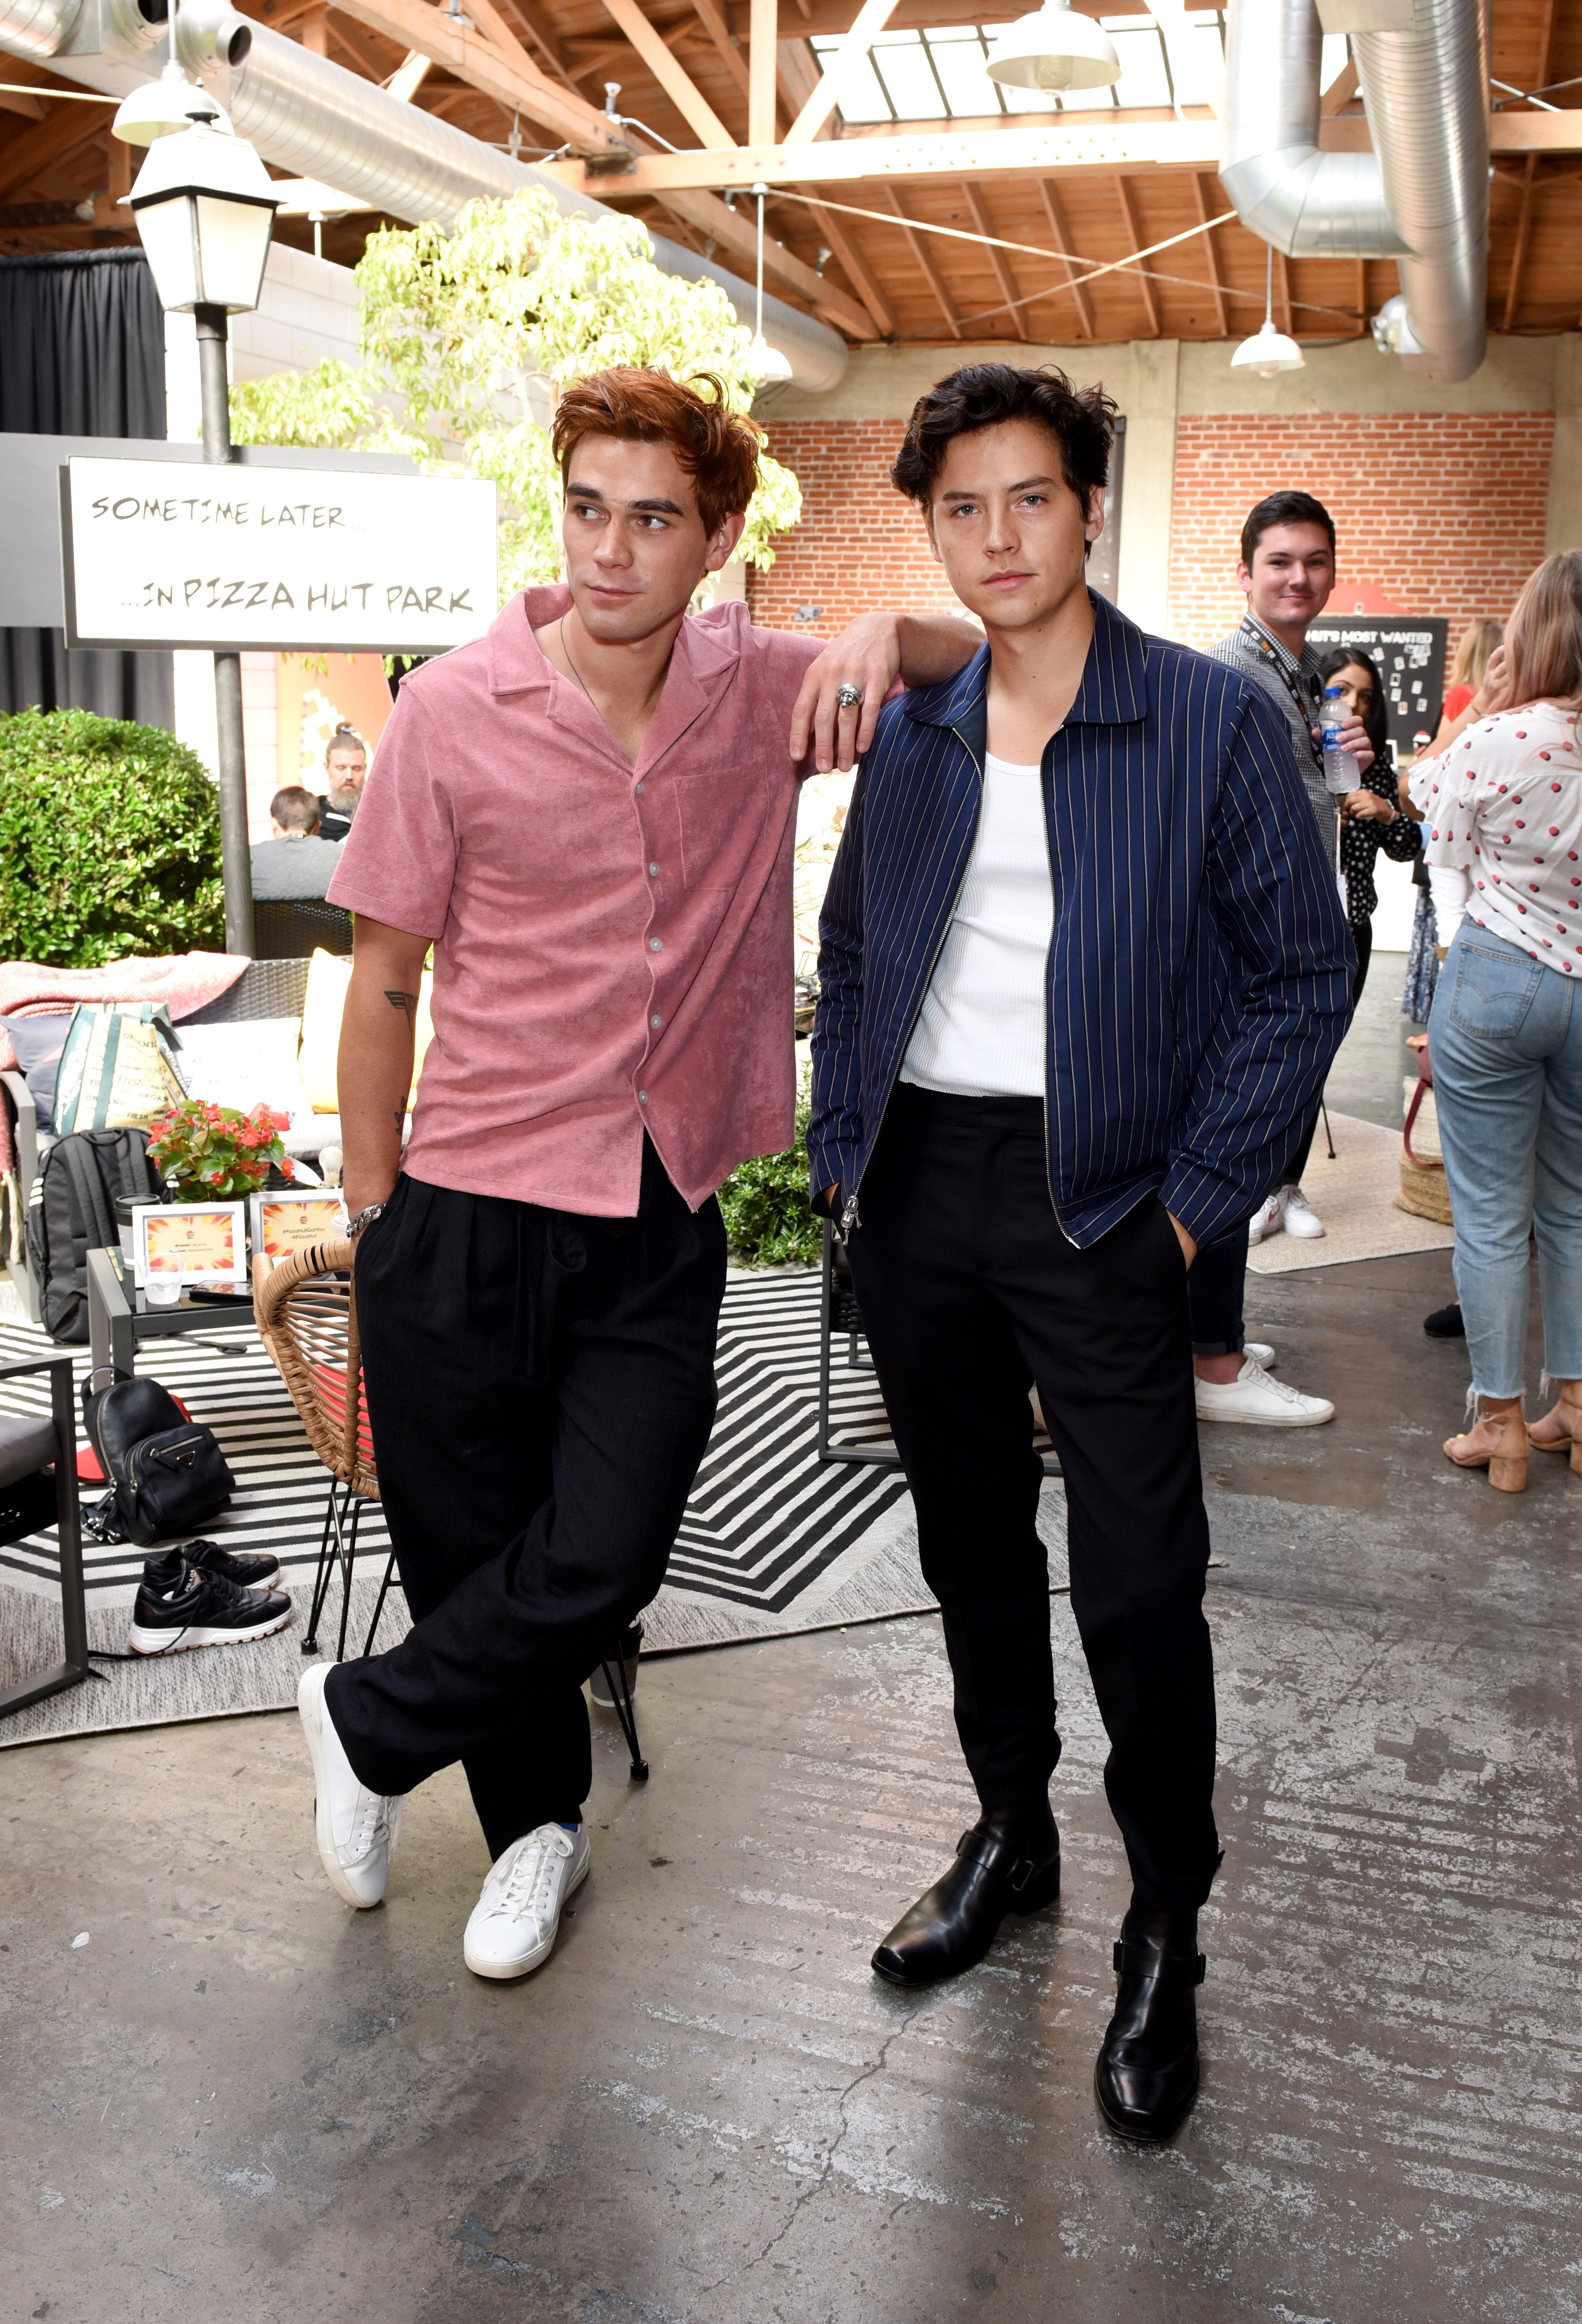 KJ Apa and Cole Spouse pictured at the Pizza Hut Lounge at 2019 Comic-Con International: San Diego, California. | Photo: Getty Images